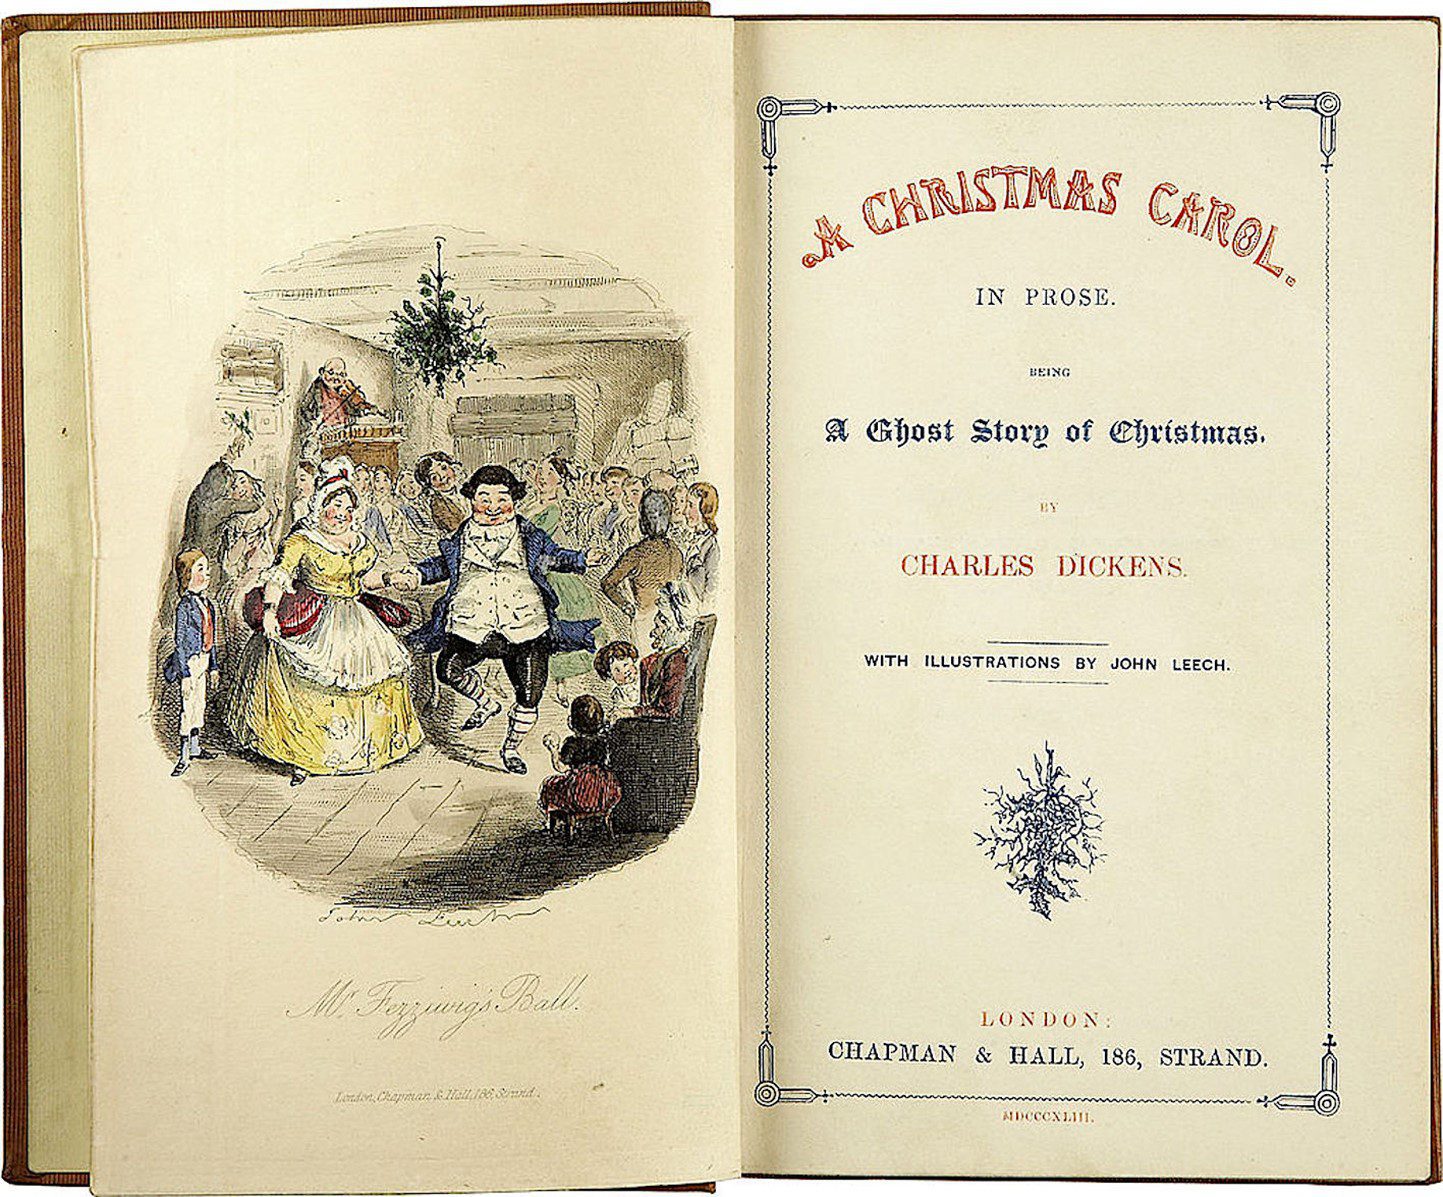 Artwork of couple dancing at Christmas party in A Christmas Carol by Charles Dickens